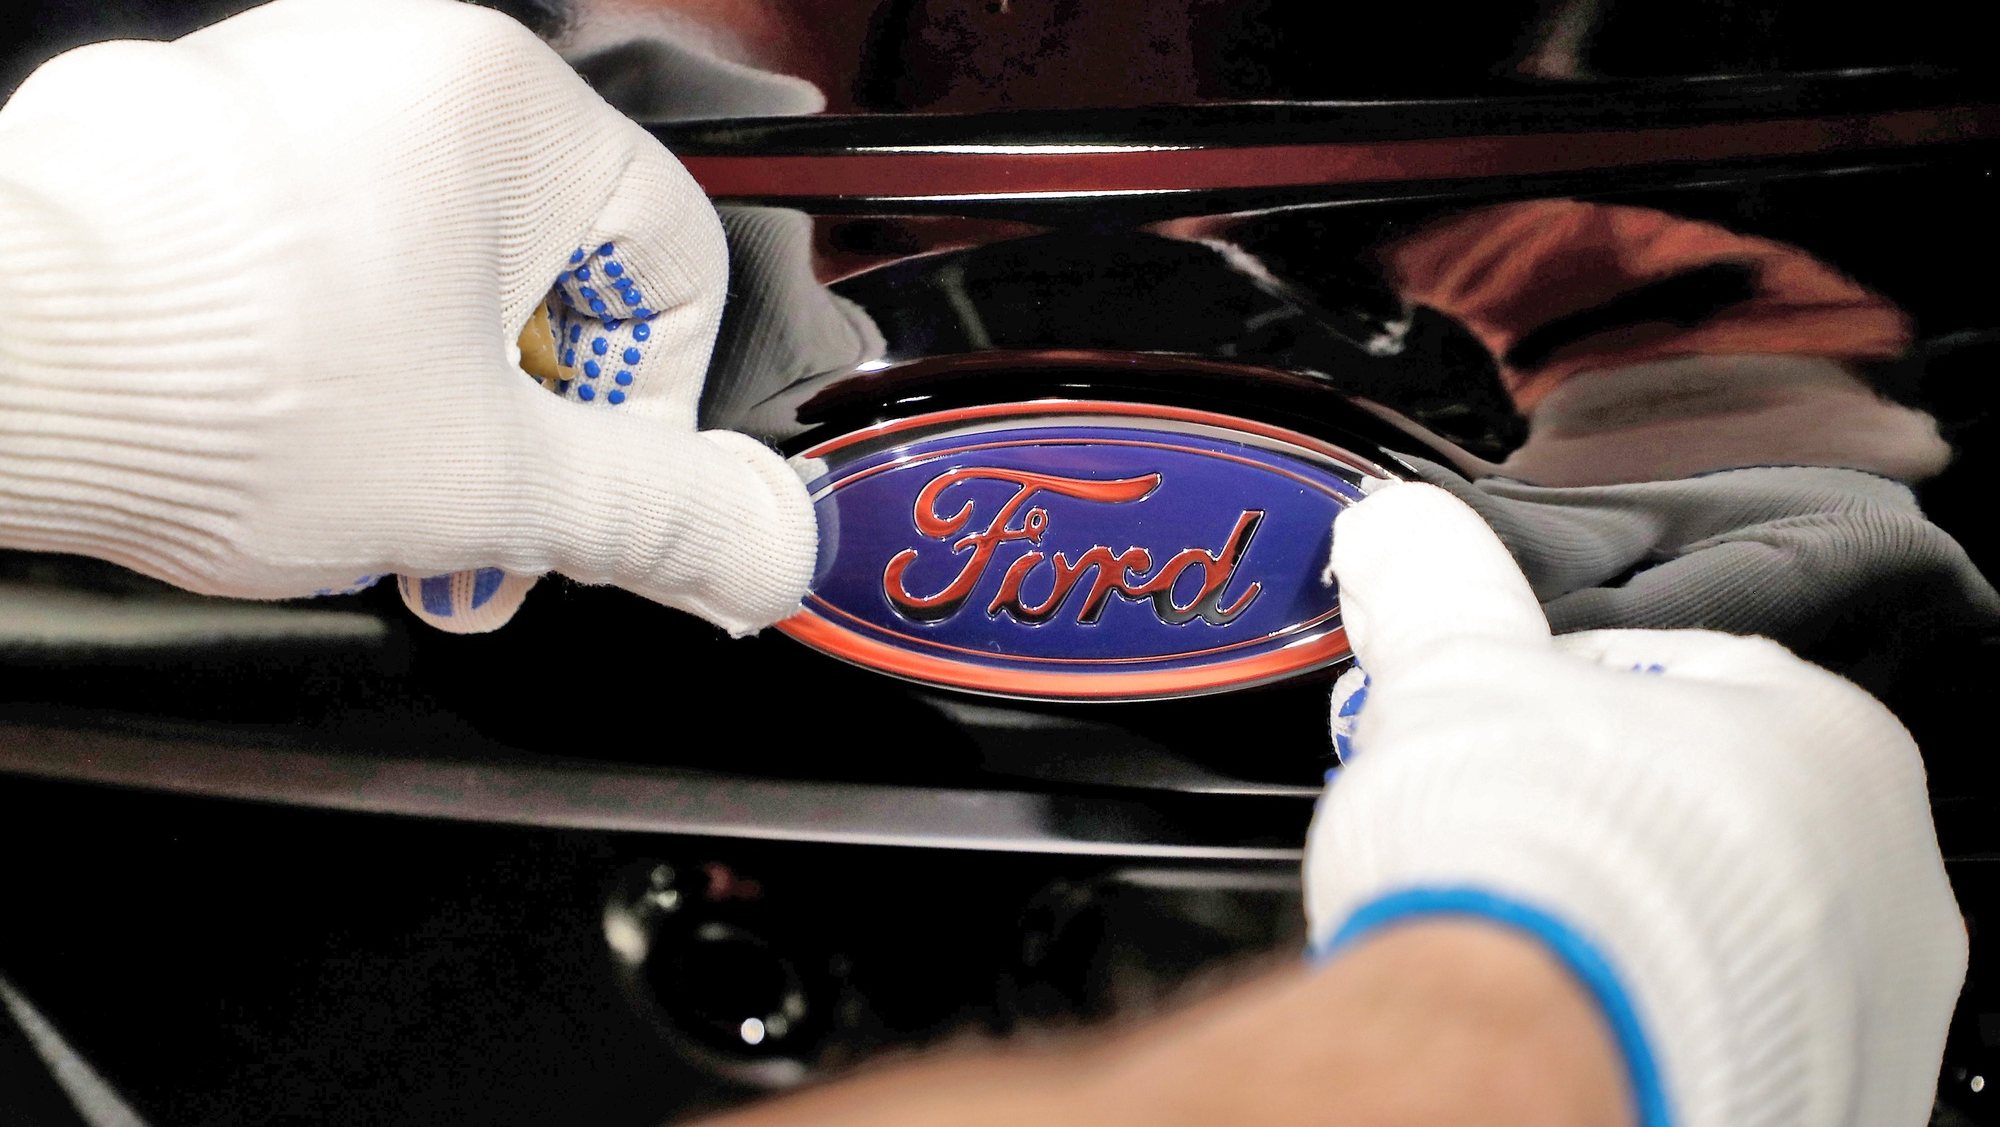 epa09018145 (FILE) - A worker attaches the Ford logo to a Fiesta car at the US car manufacturer plant Ford in Cologne, Germany, 18 January 2019   (reissued 17 February 2021). Ford on 17 February 2021 said all Ford passenger vehicles sold in Europe will either be hybrid or fully electric by mid-2026. Ford further said all of its passenger vehicles will be fully electric by 2030.  EPA/FRIEDEMANN VOGEL *** Local Caption *** 54928264